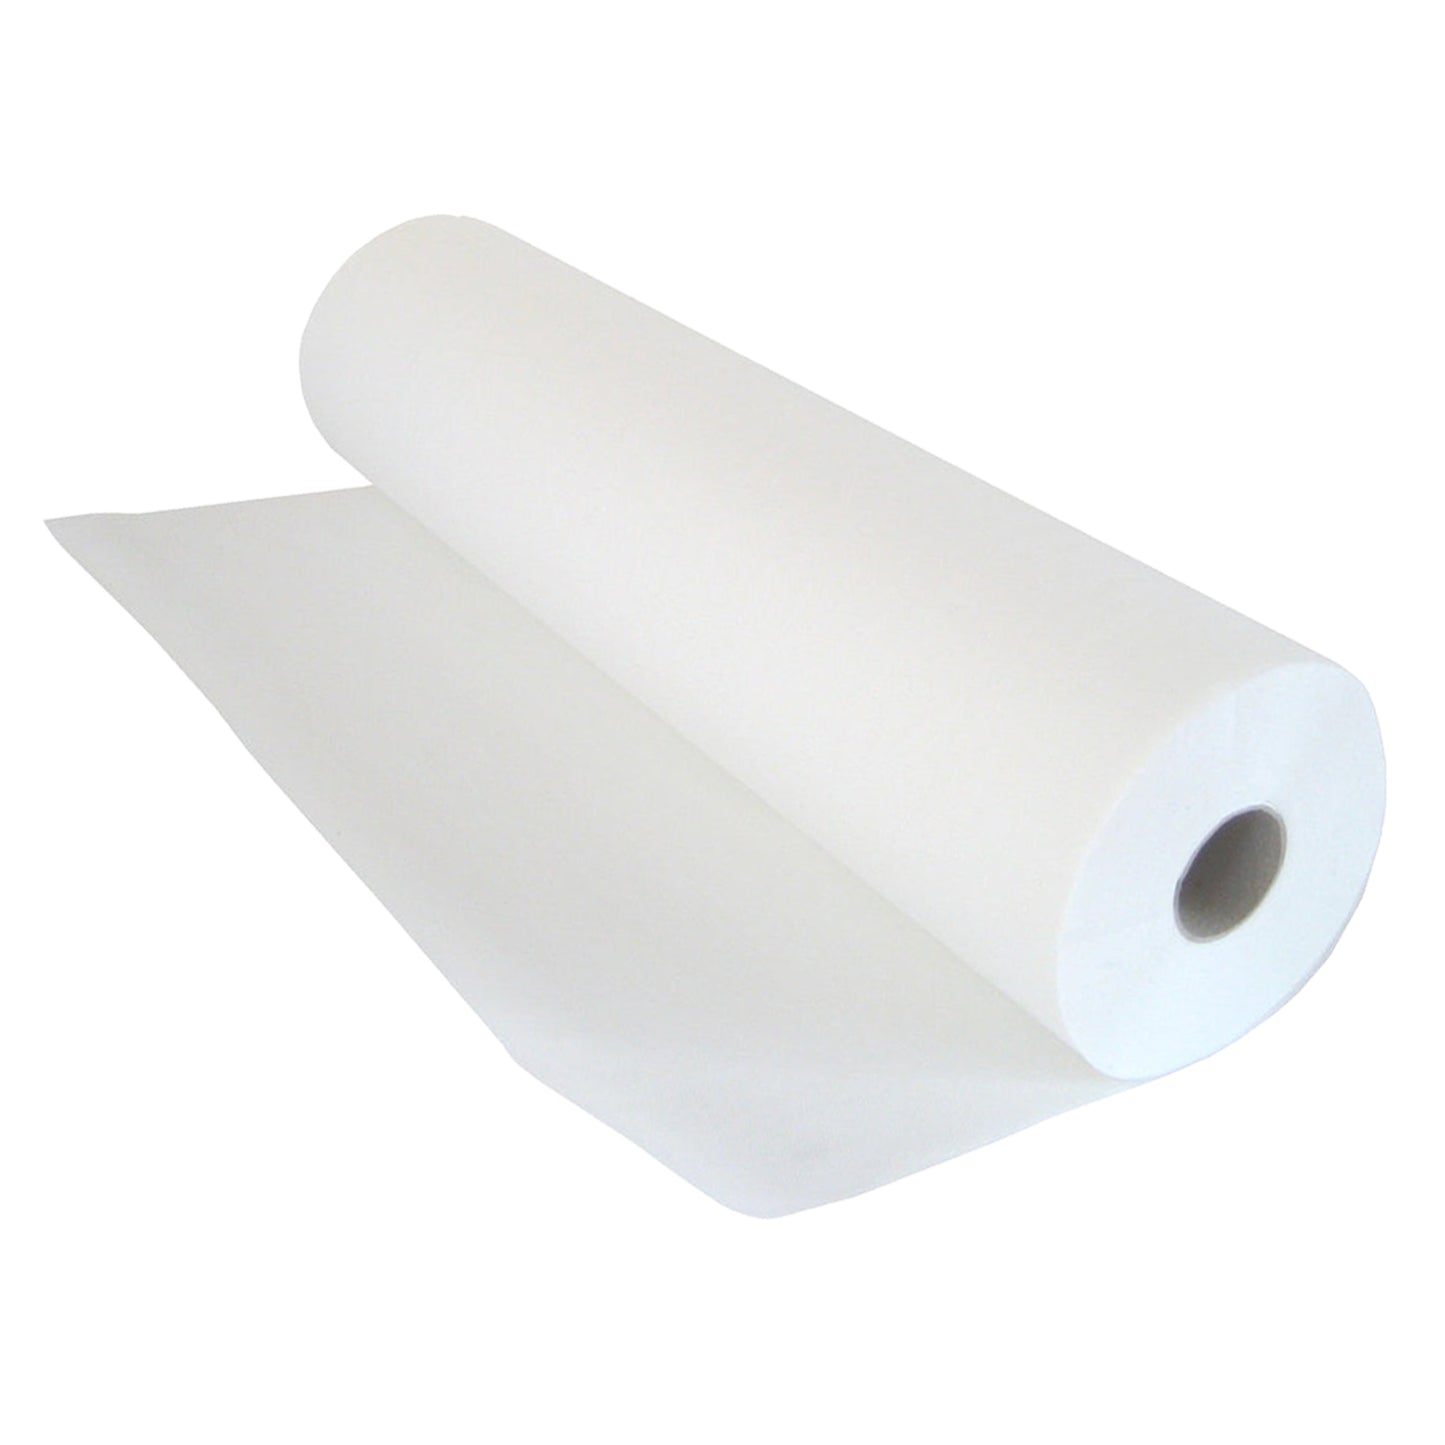 Medical Towel Laminated 2 Ply (9 Rolls)